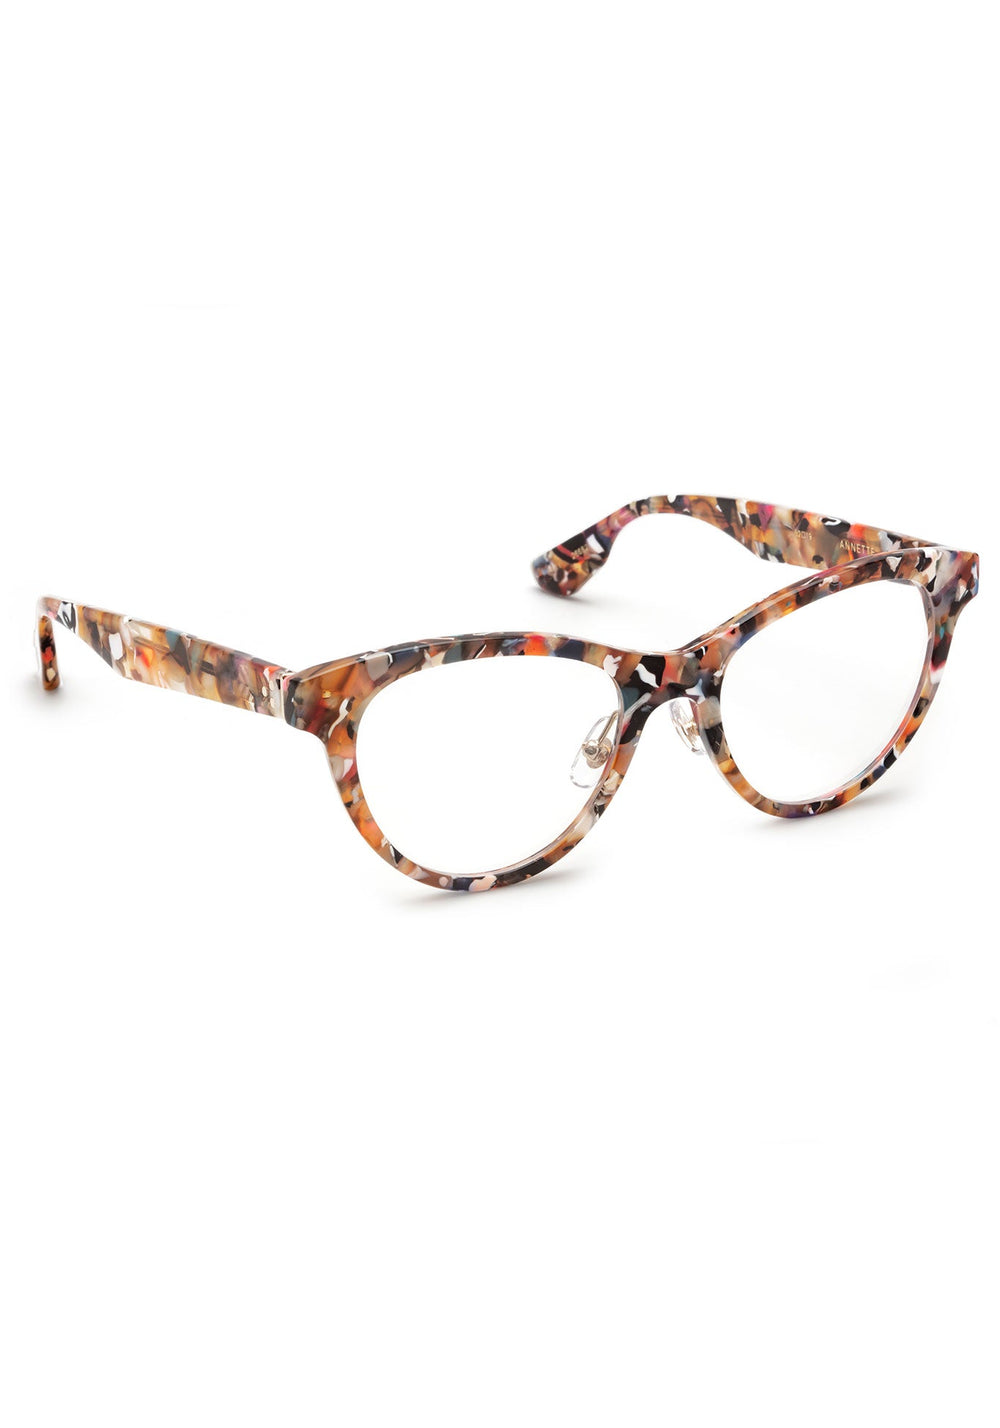 KREWE ANNETTE | Naples Handcrafted, Luxury Colorful Acetate Glasses